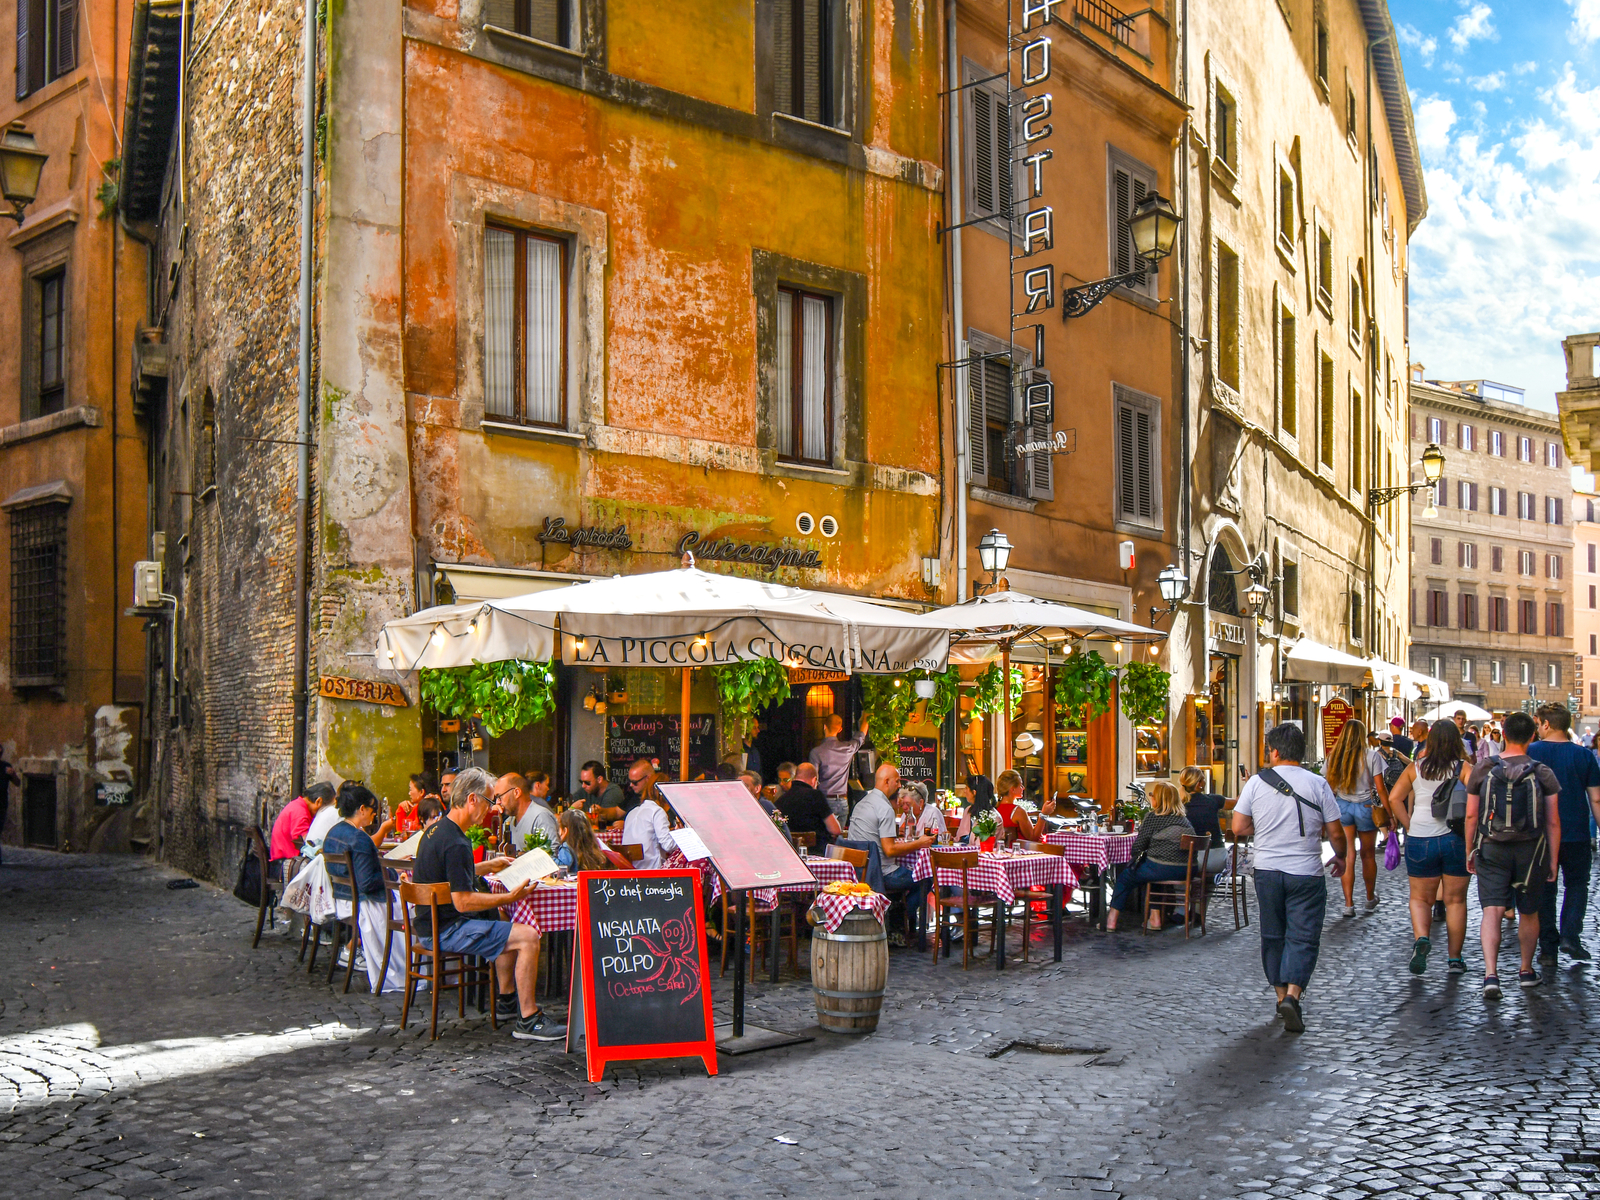 Cafe on an alleyway pictured during the best time to visit Rome